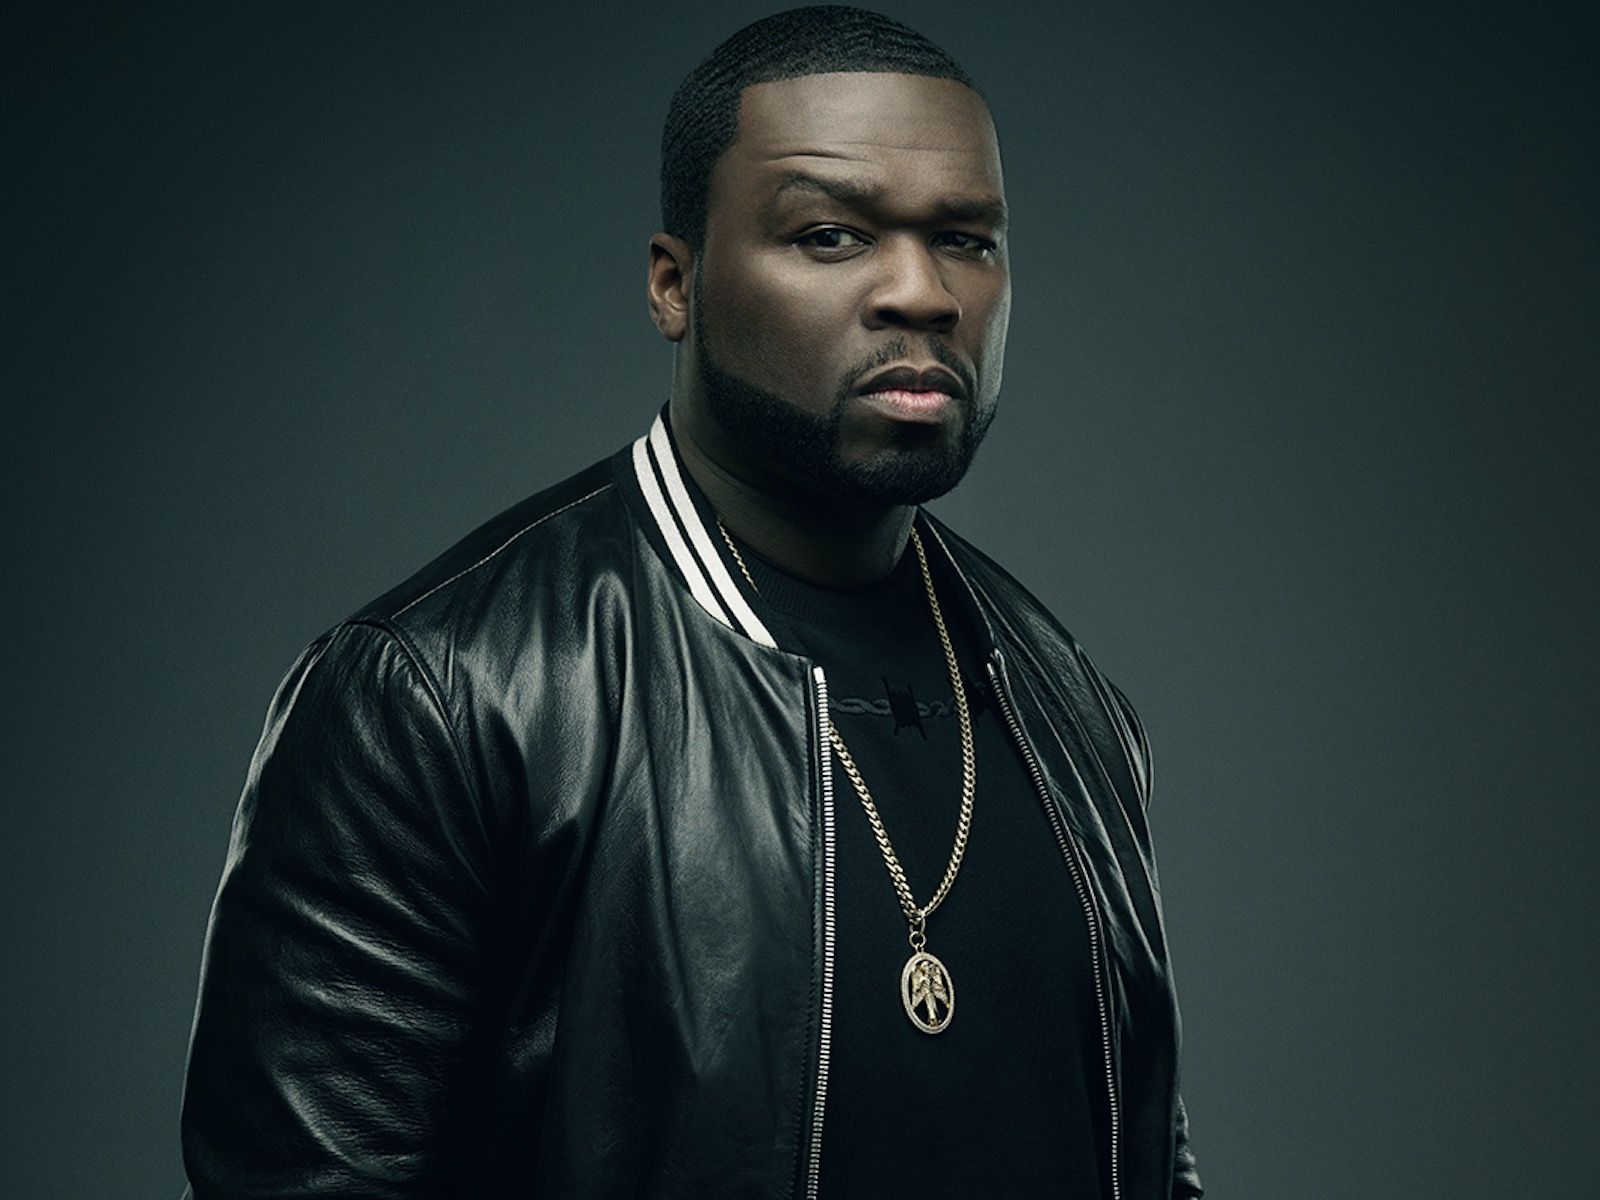 50 Cent Gets At Starz Over Last Night's Episode: 